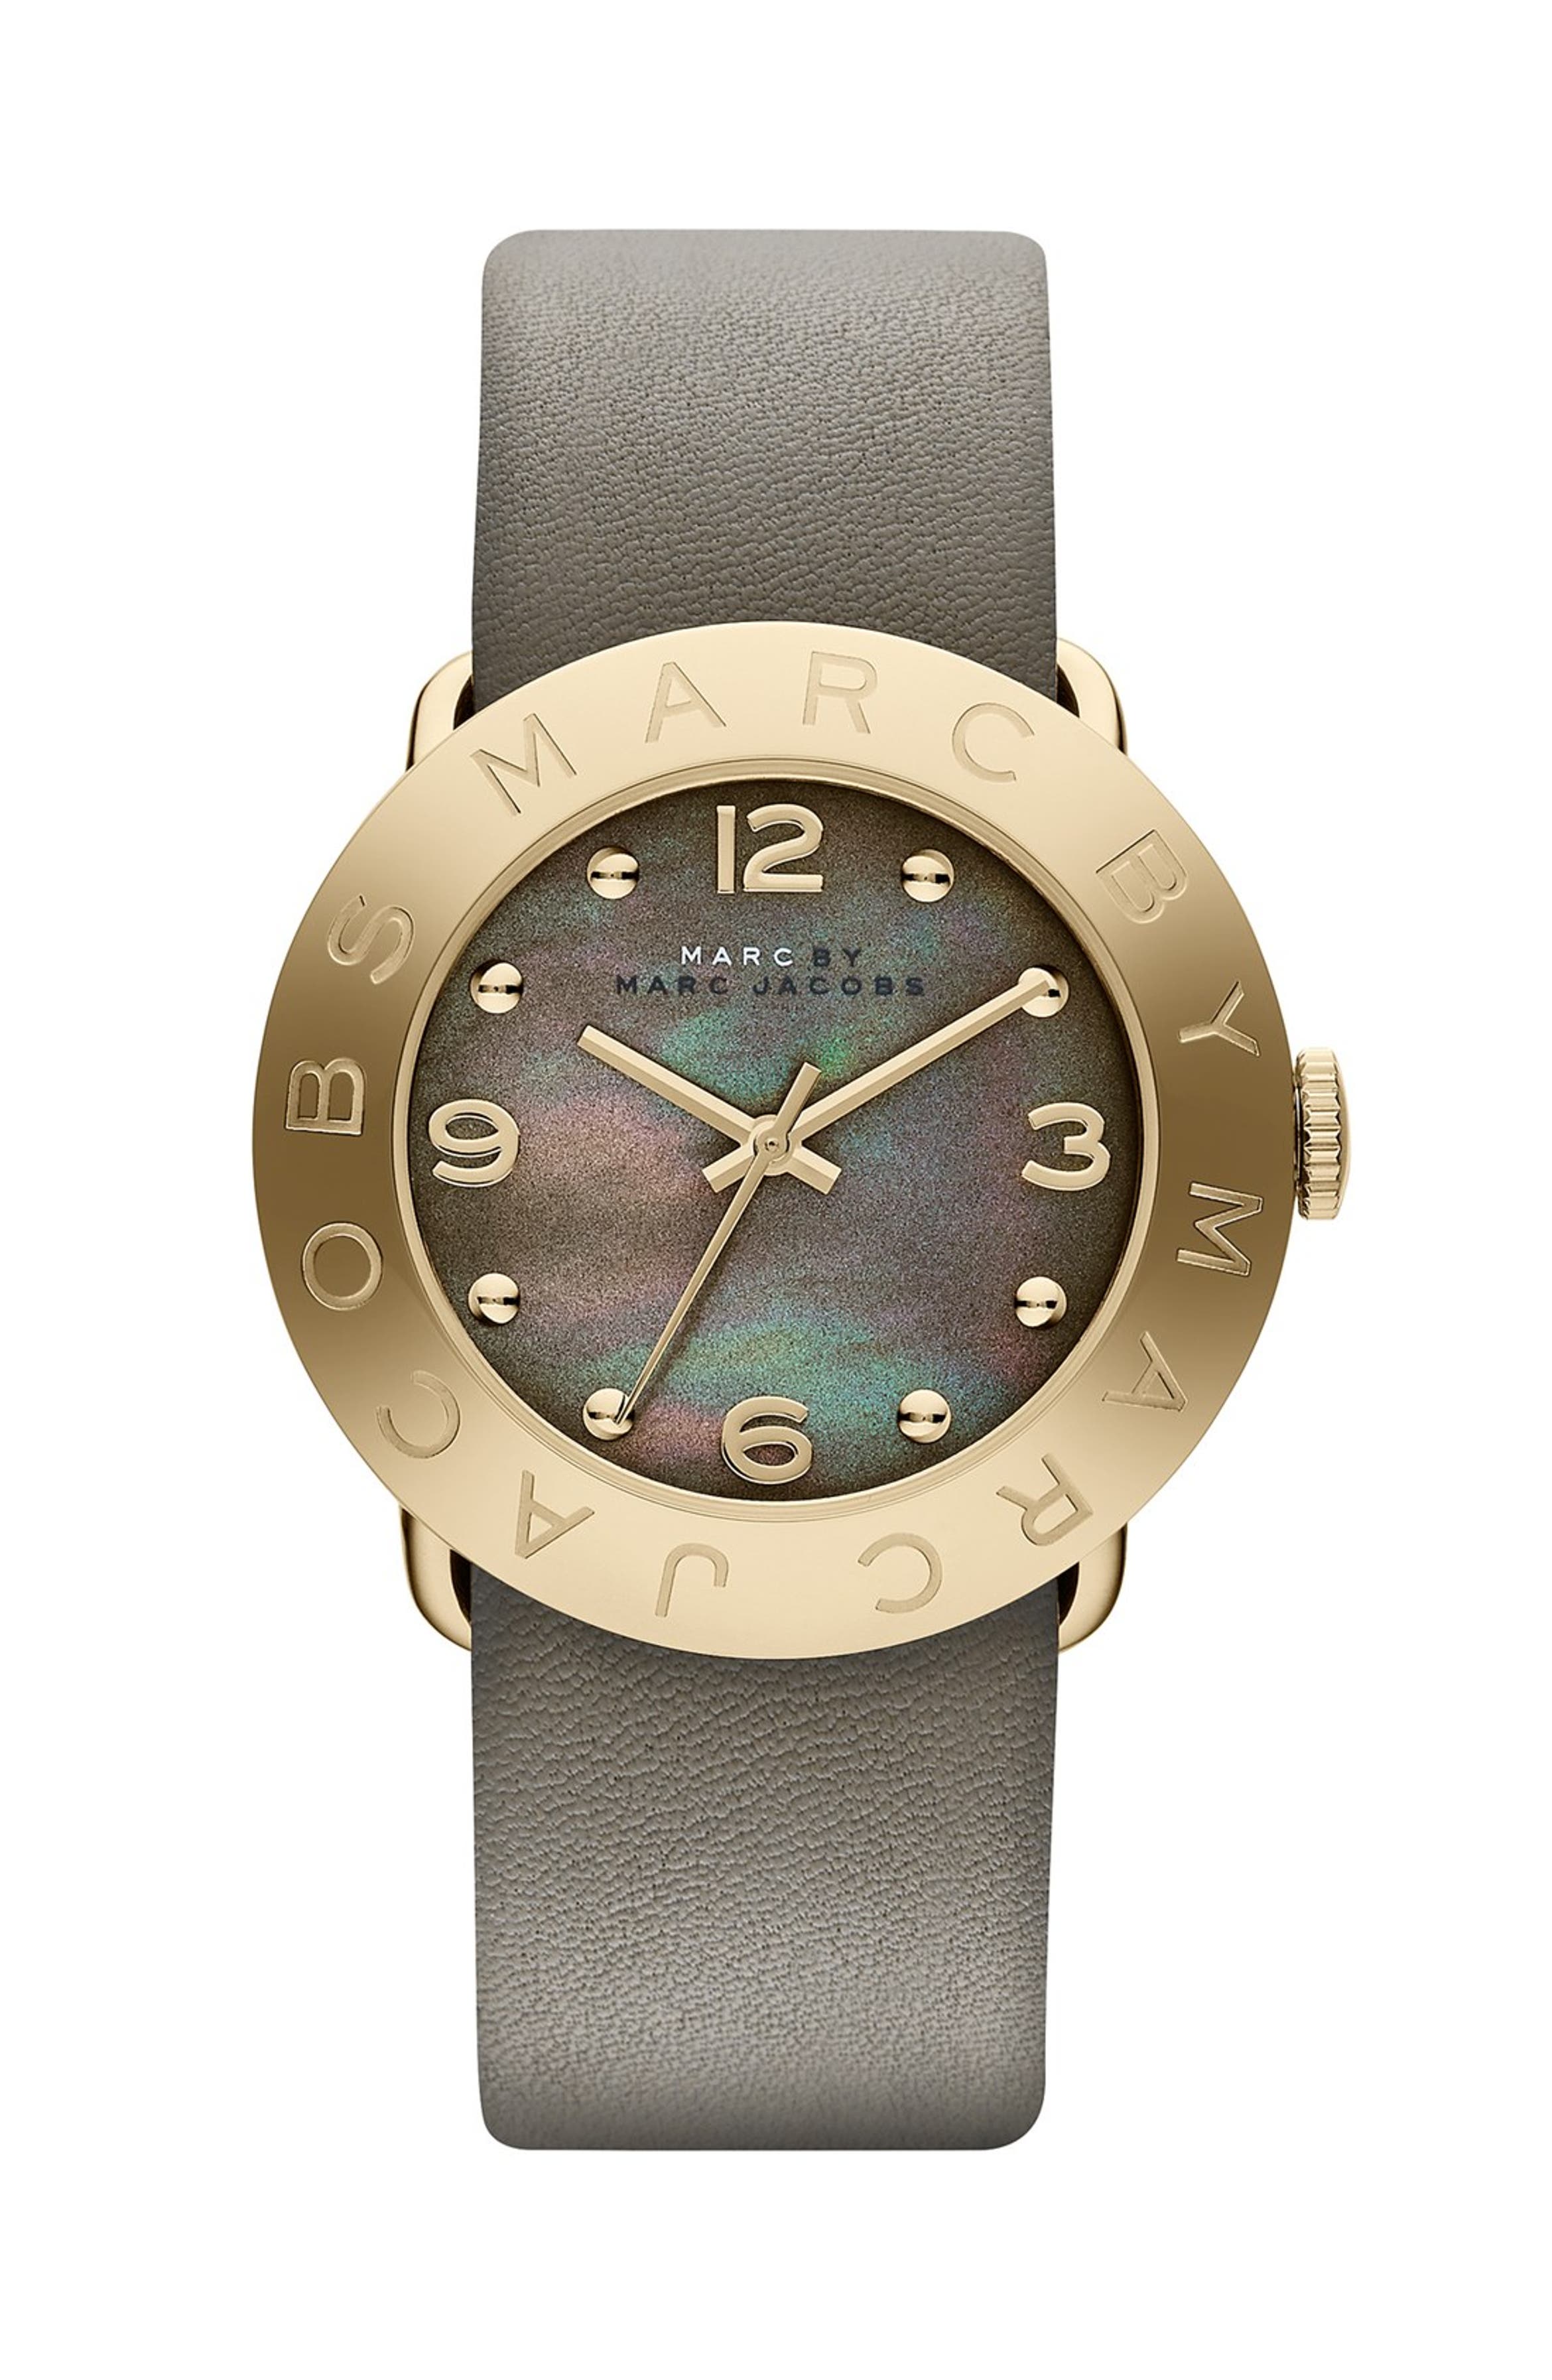 MARC JACOBS 'Amy' Leather Strap Watch, 36mm | Nordstrom